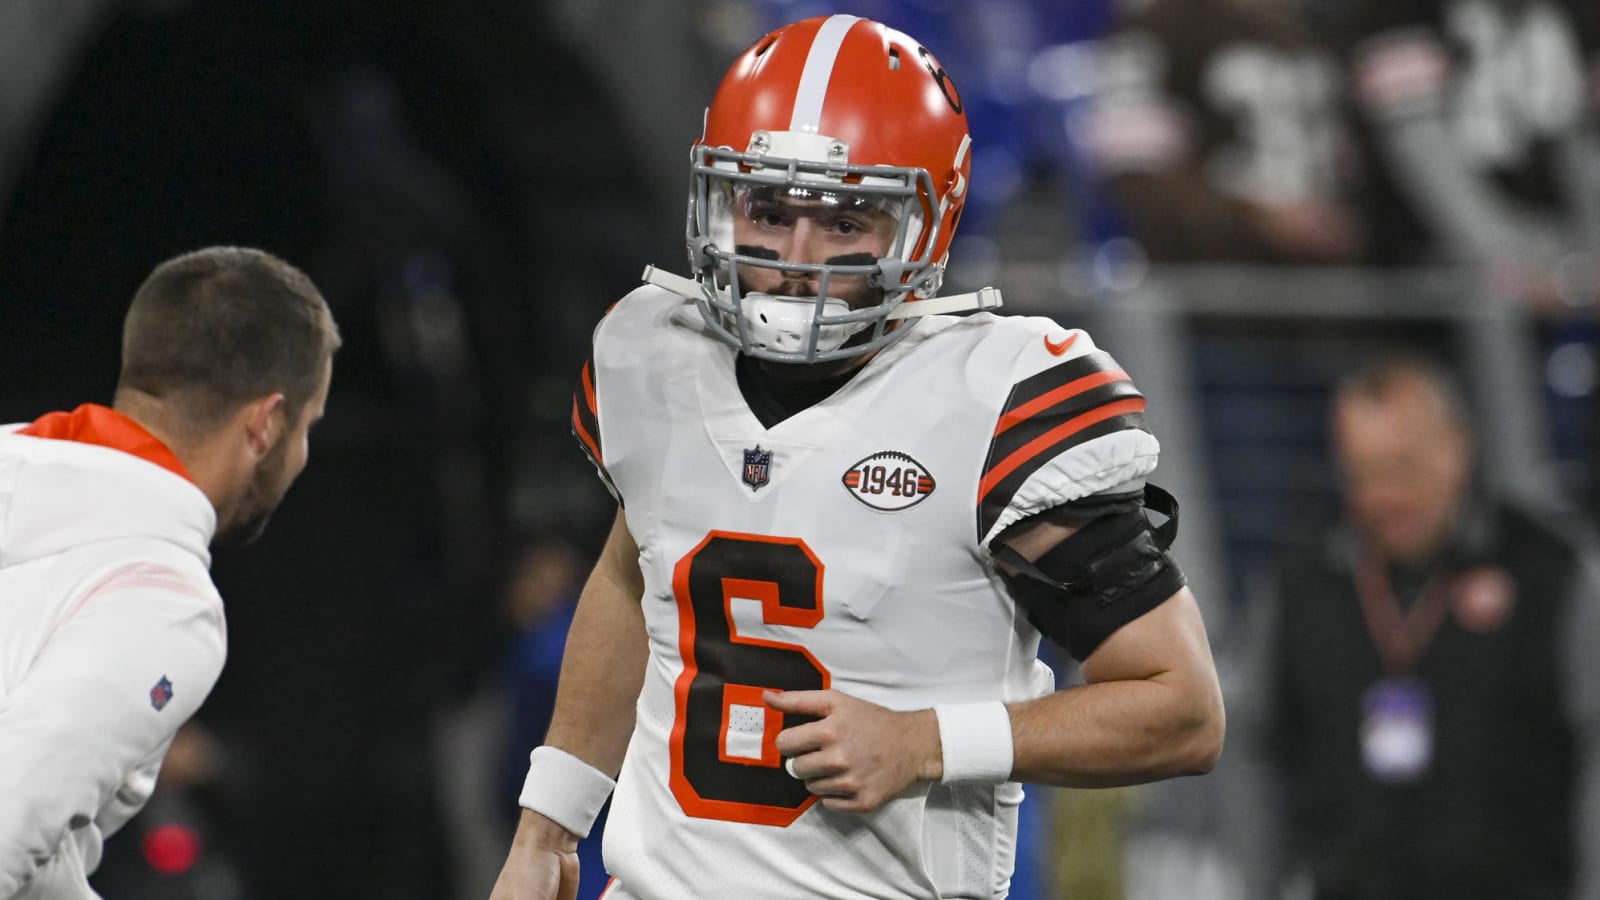 Browns sticking with Mayfield despite injuries, poor play